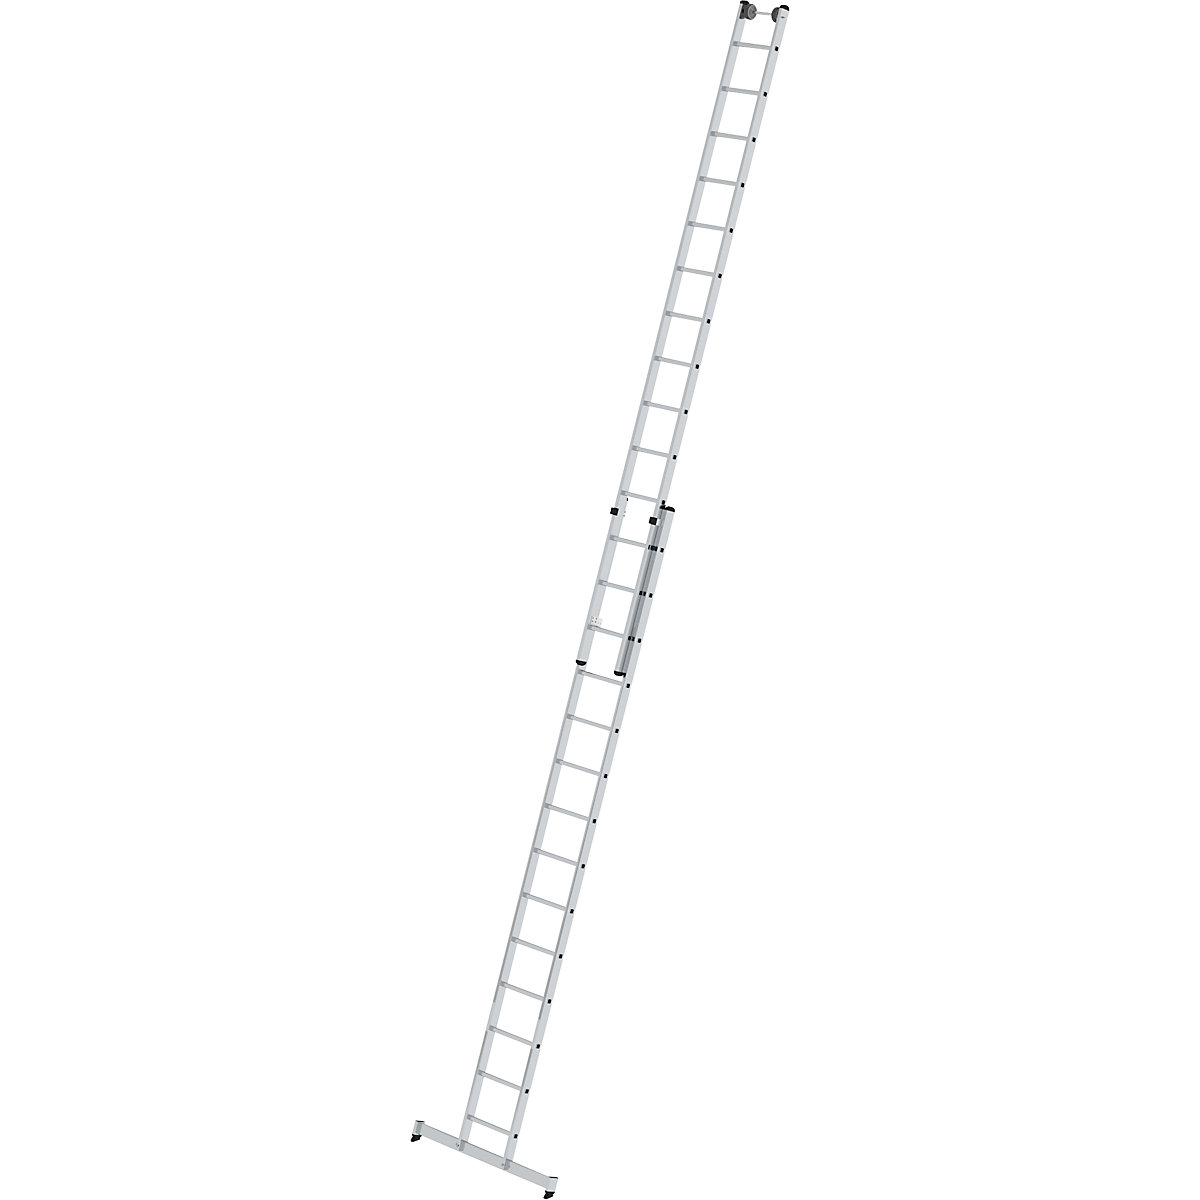 Height adjustable lean-to ladder – MUNK, extension ladder, 2-part, 2 x 14 rungs, with nivello® support-11